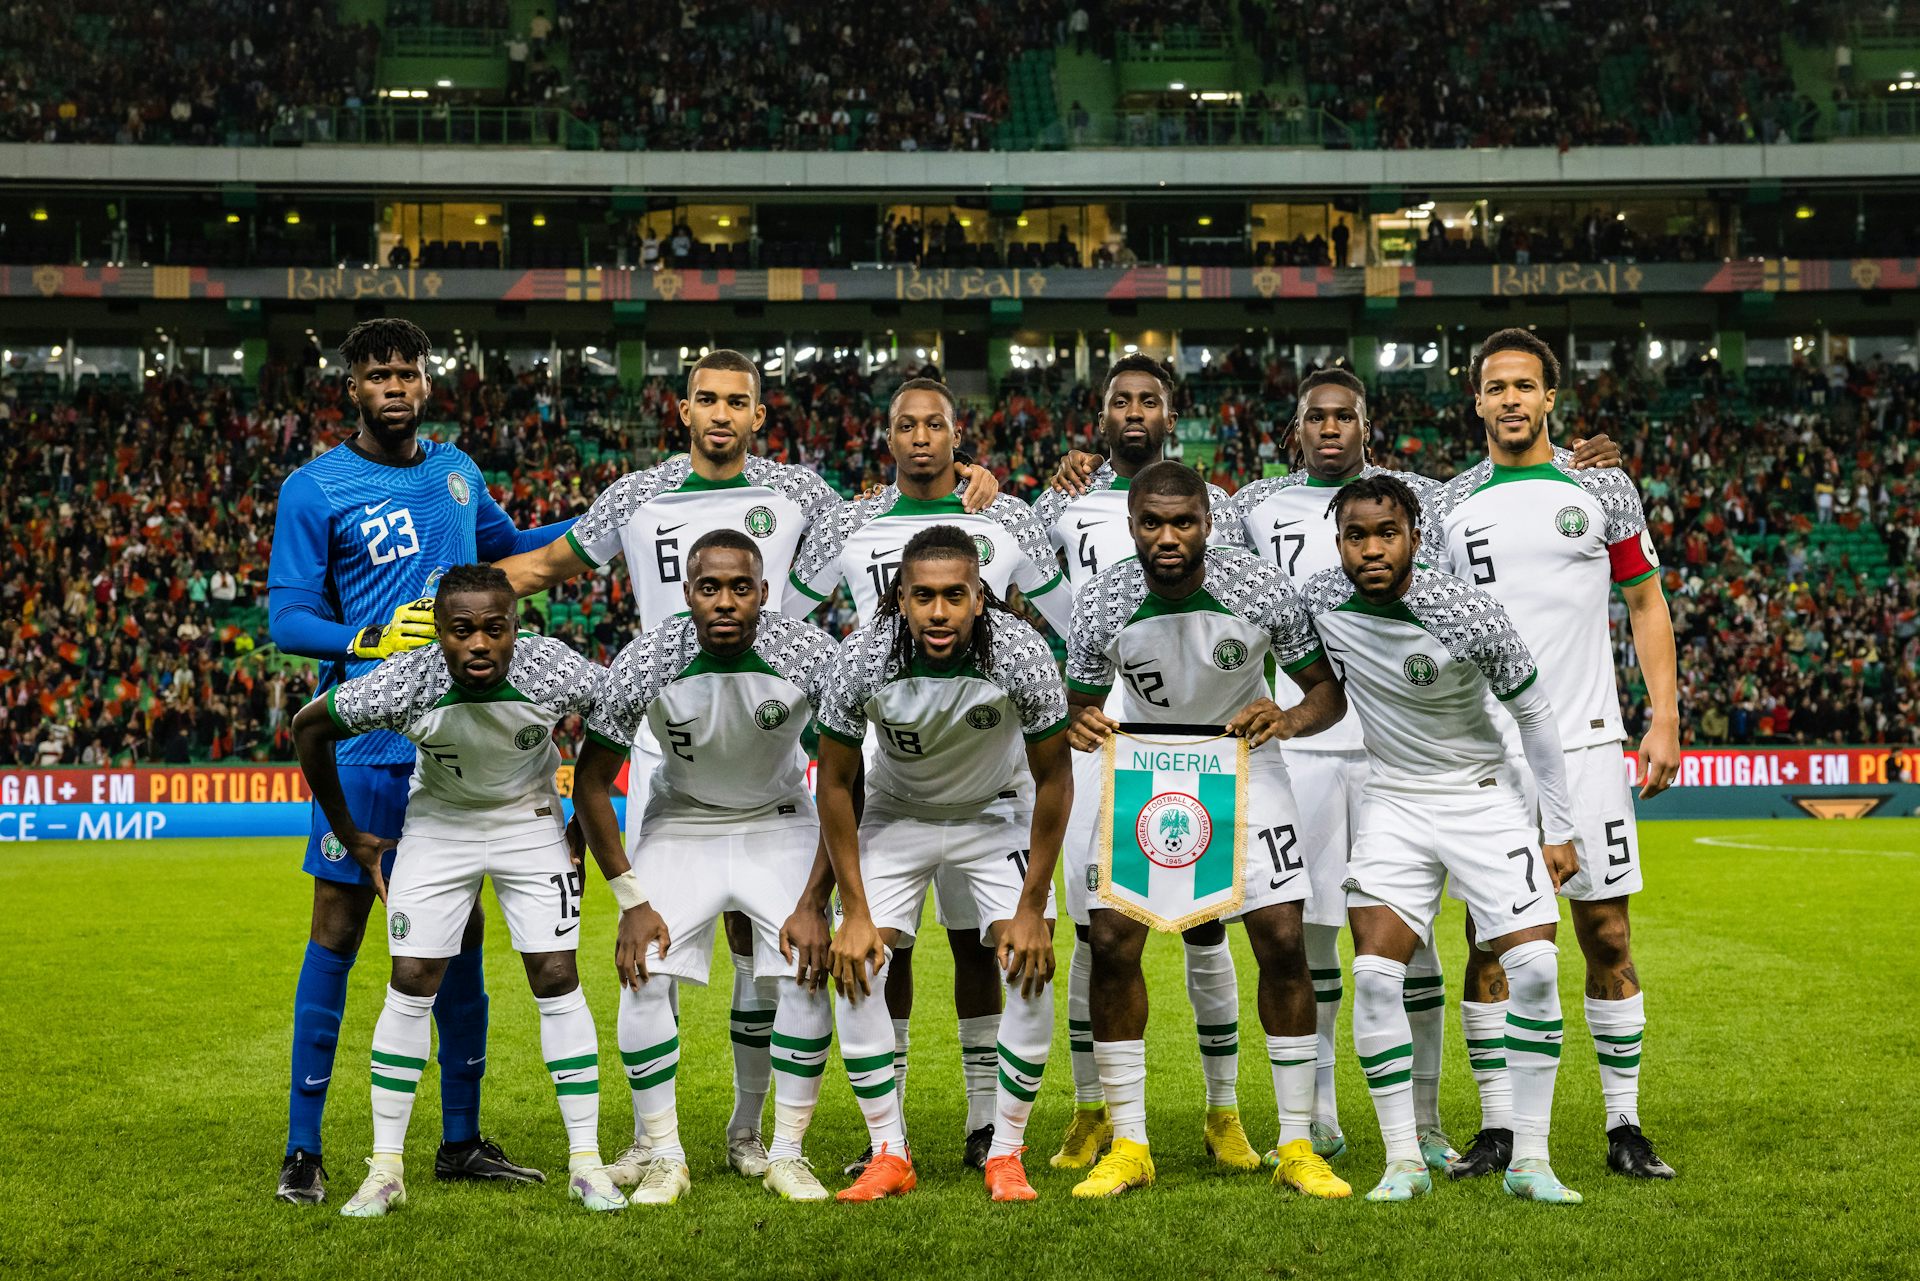 Nigeria failed to qualify for the World Cup 2022